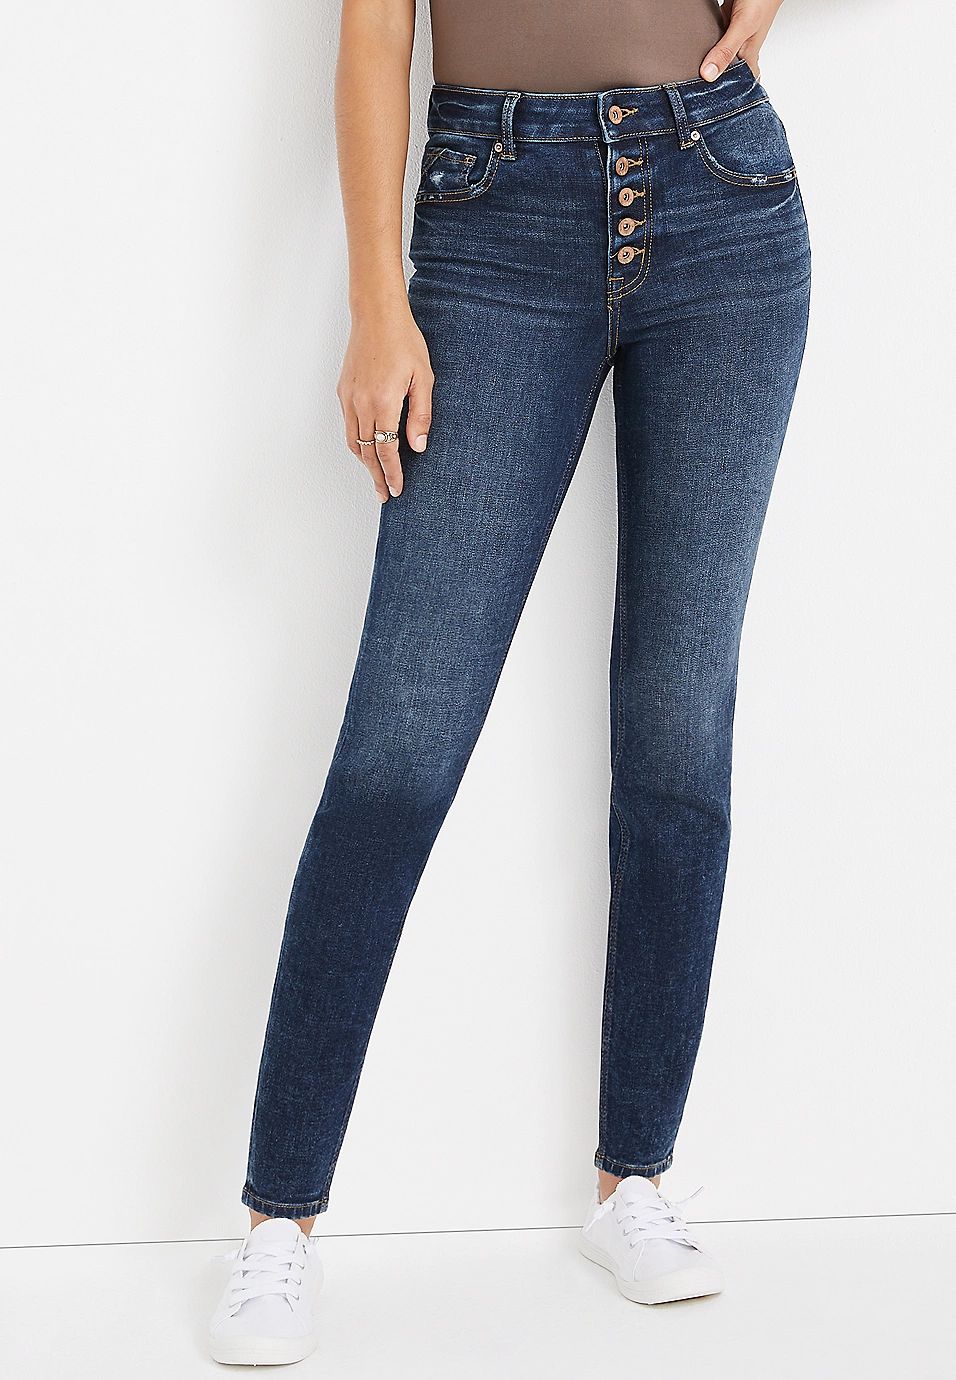 edgely™ Super Skinny High Rise Button Fly Jean | Maurices